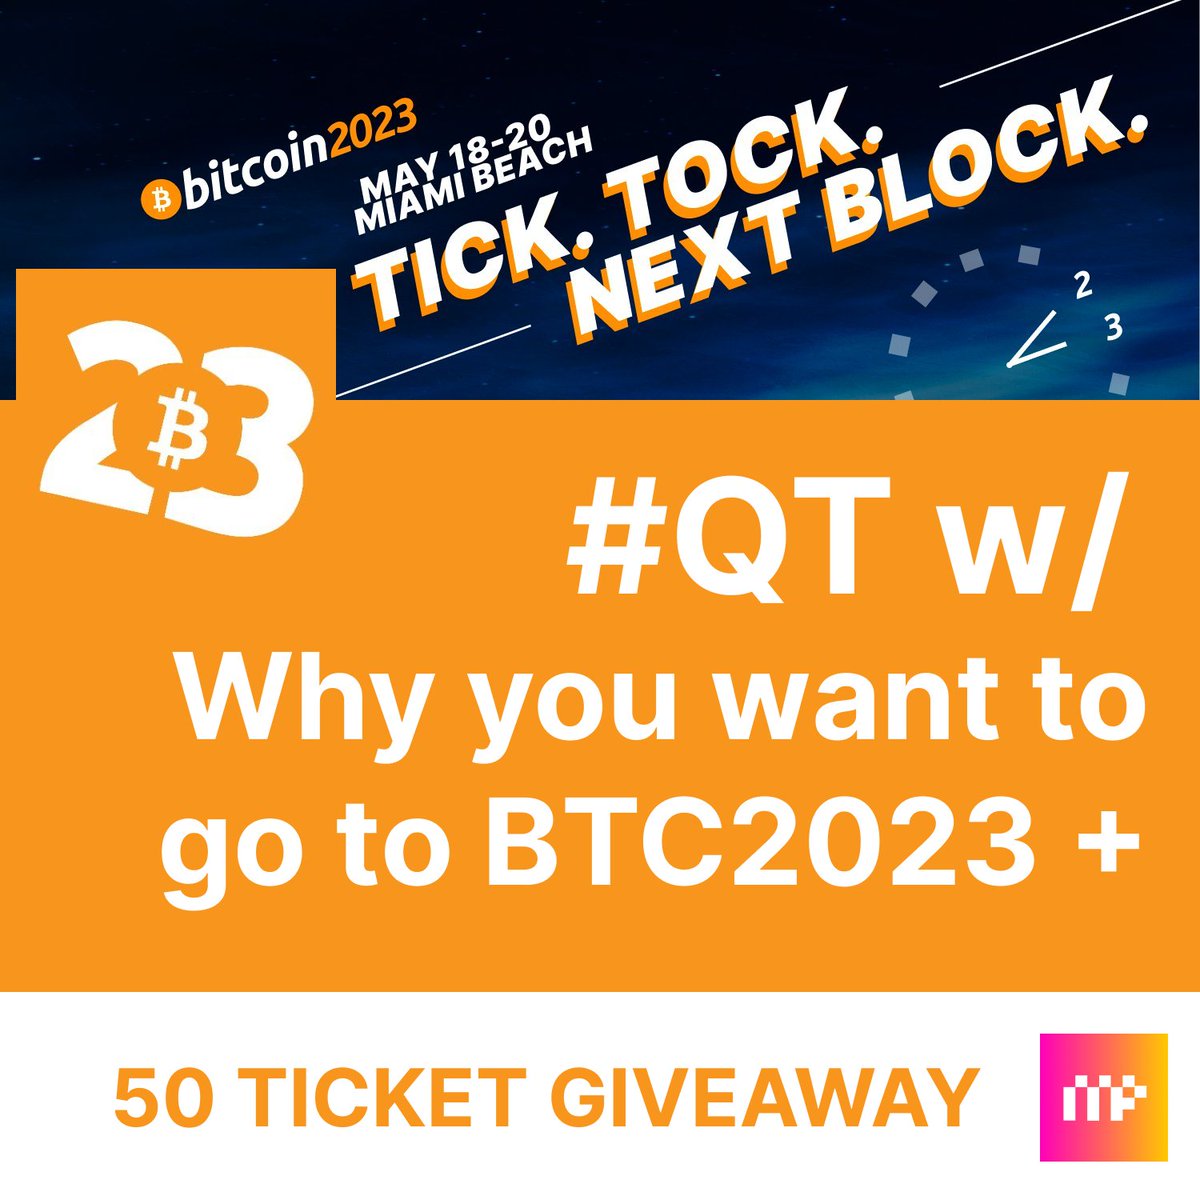 @TheBitcoinConf #Bitcoin2023 is happening from May 18 -20 in #Miami 🌴 & we are giving away 50 Tickets! To be eligible Quote Tweet with why you want to go to #BTC 2023 #diversity